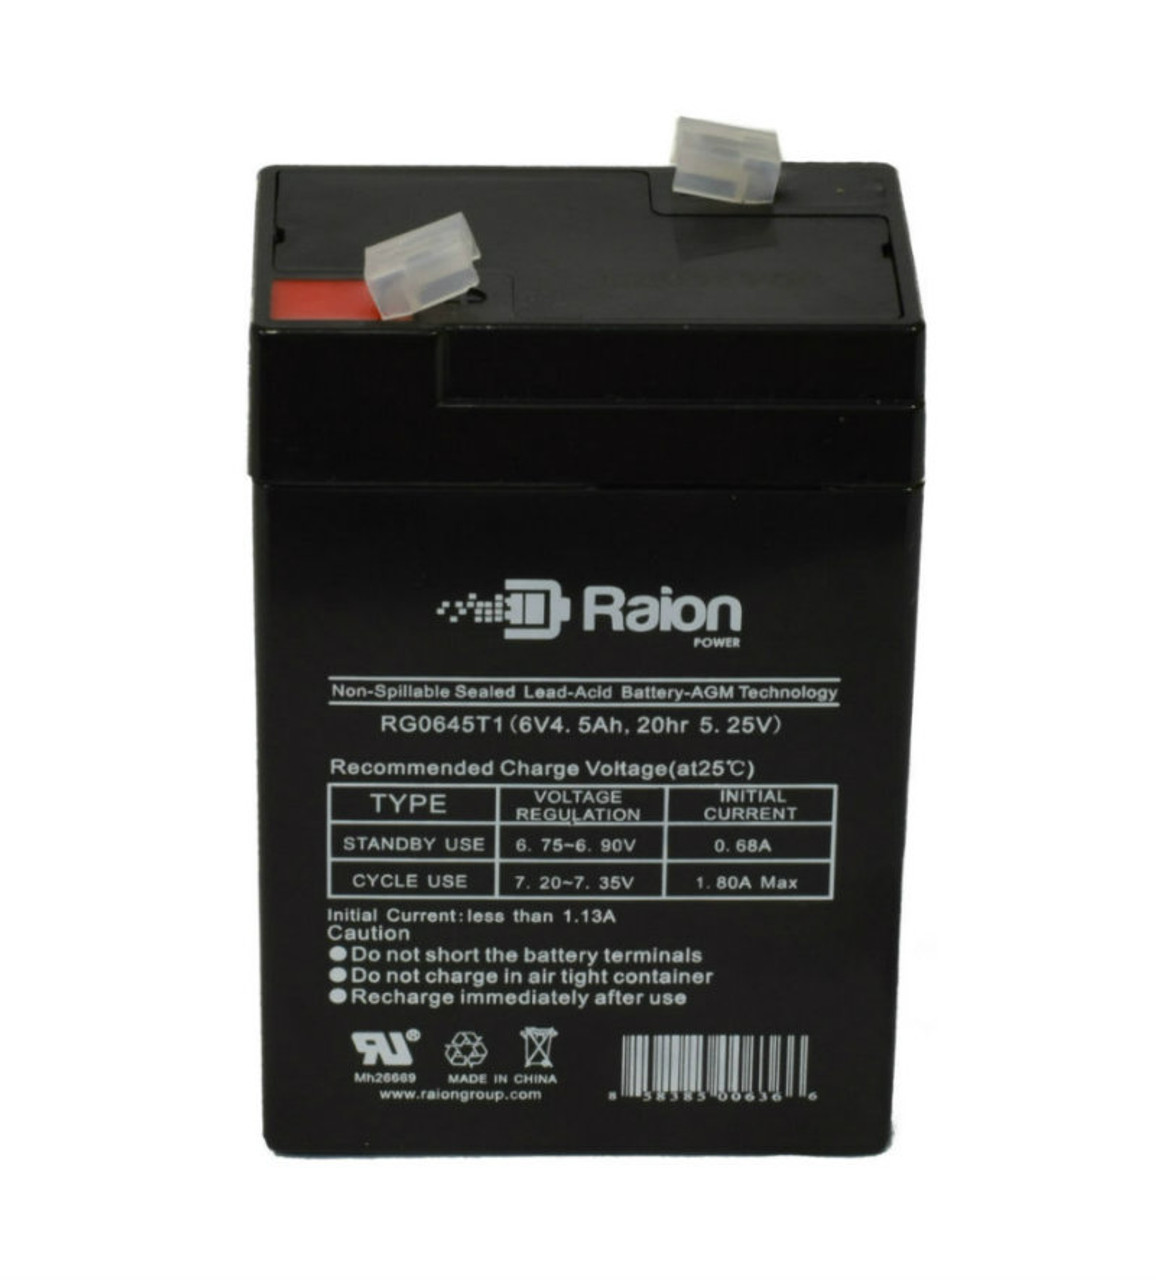 Raion Power RG0645T1 Replacement Battery Cartridge for Nellcor NPB 3900